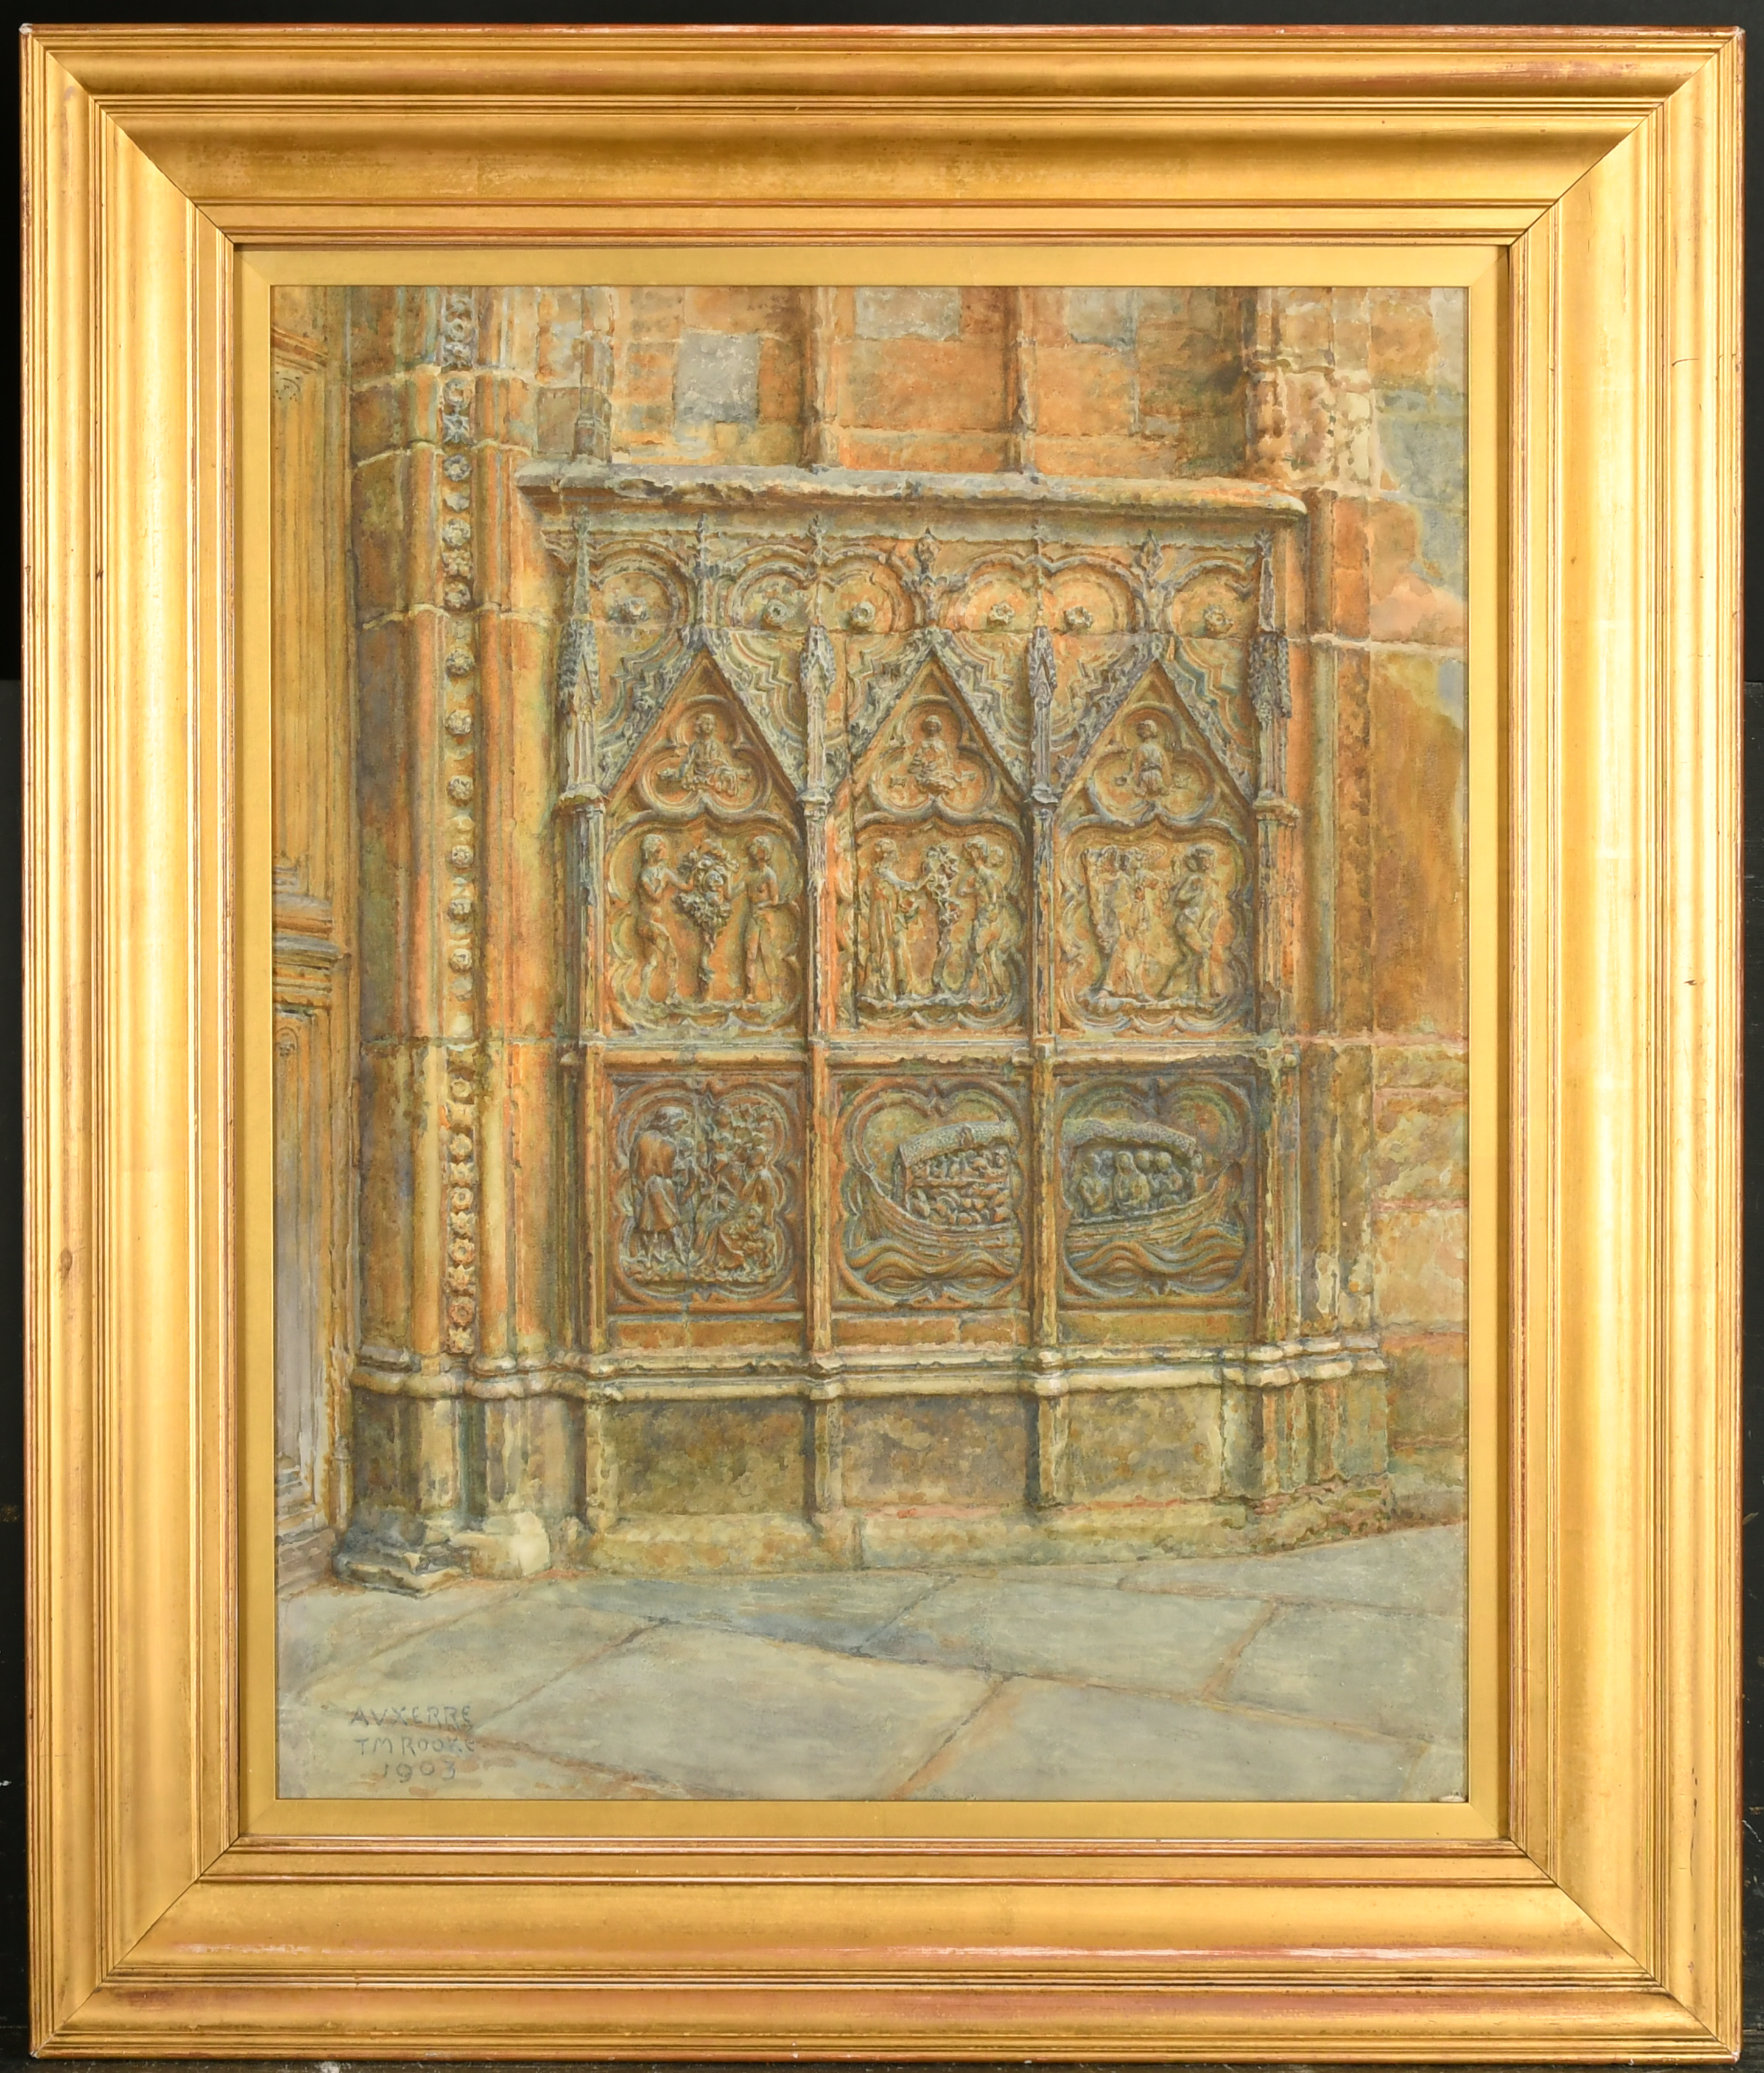 Thomas Matthew Rooke (1842-1942) British. "Carvings by The Cathedral Door Auxerre, France", - Image 2 of 5